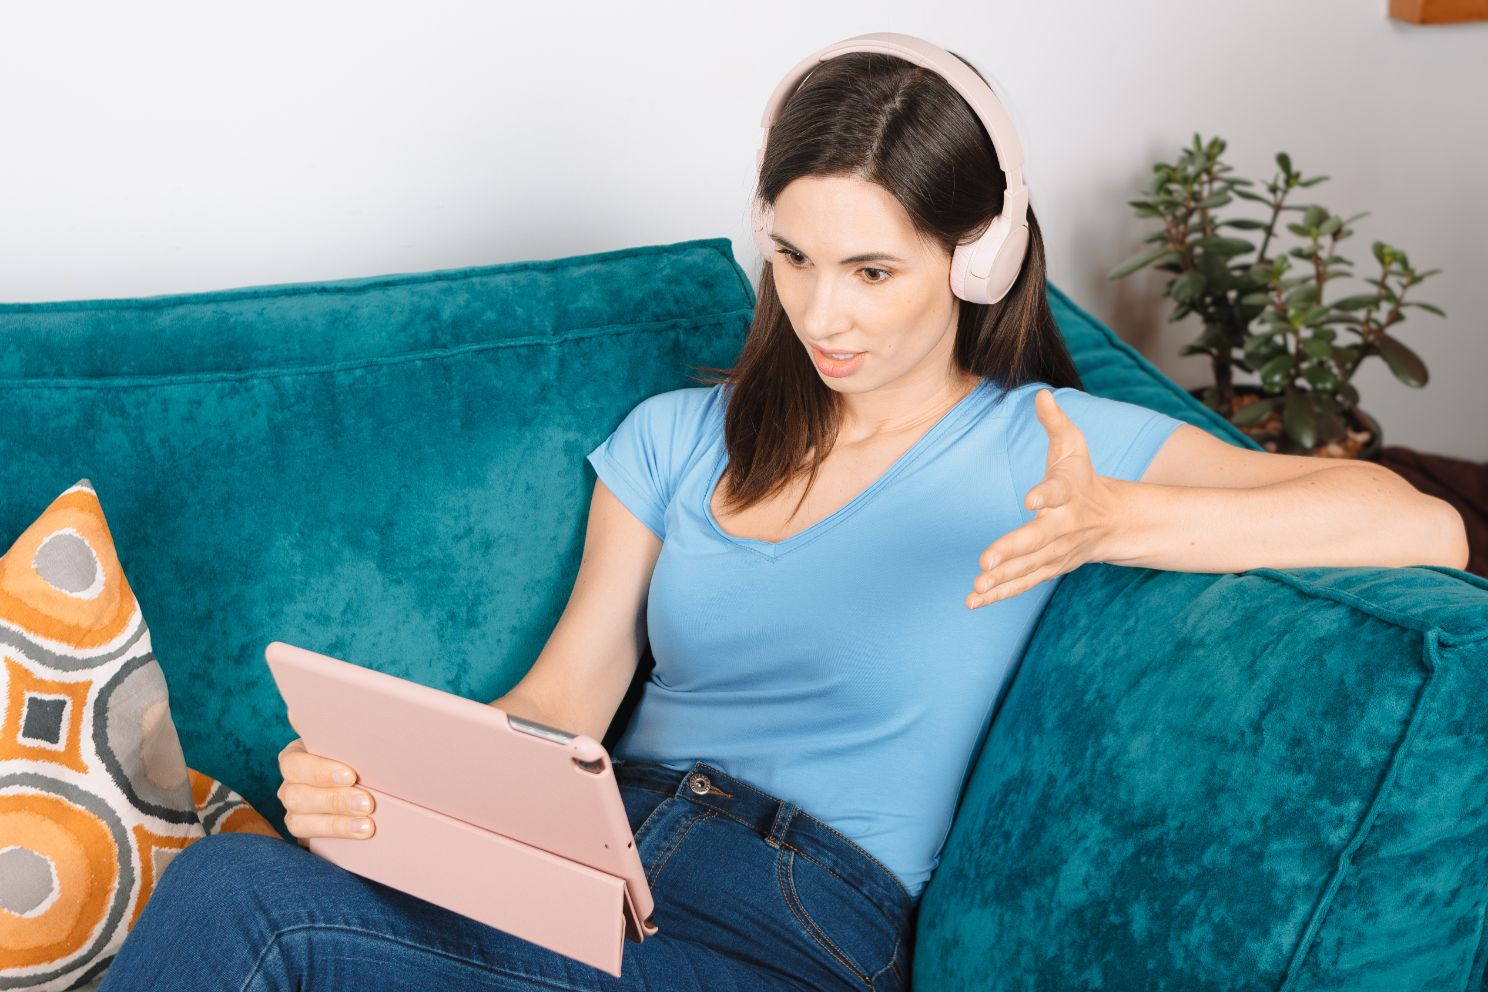 Lady talking on computer with headphones on 